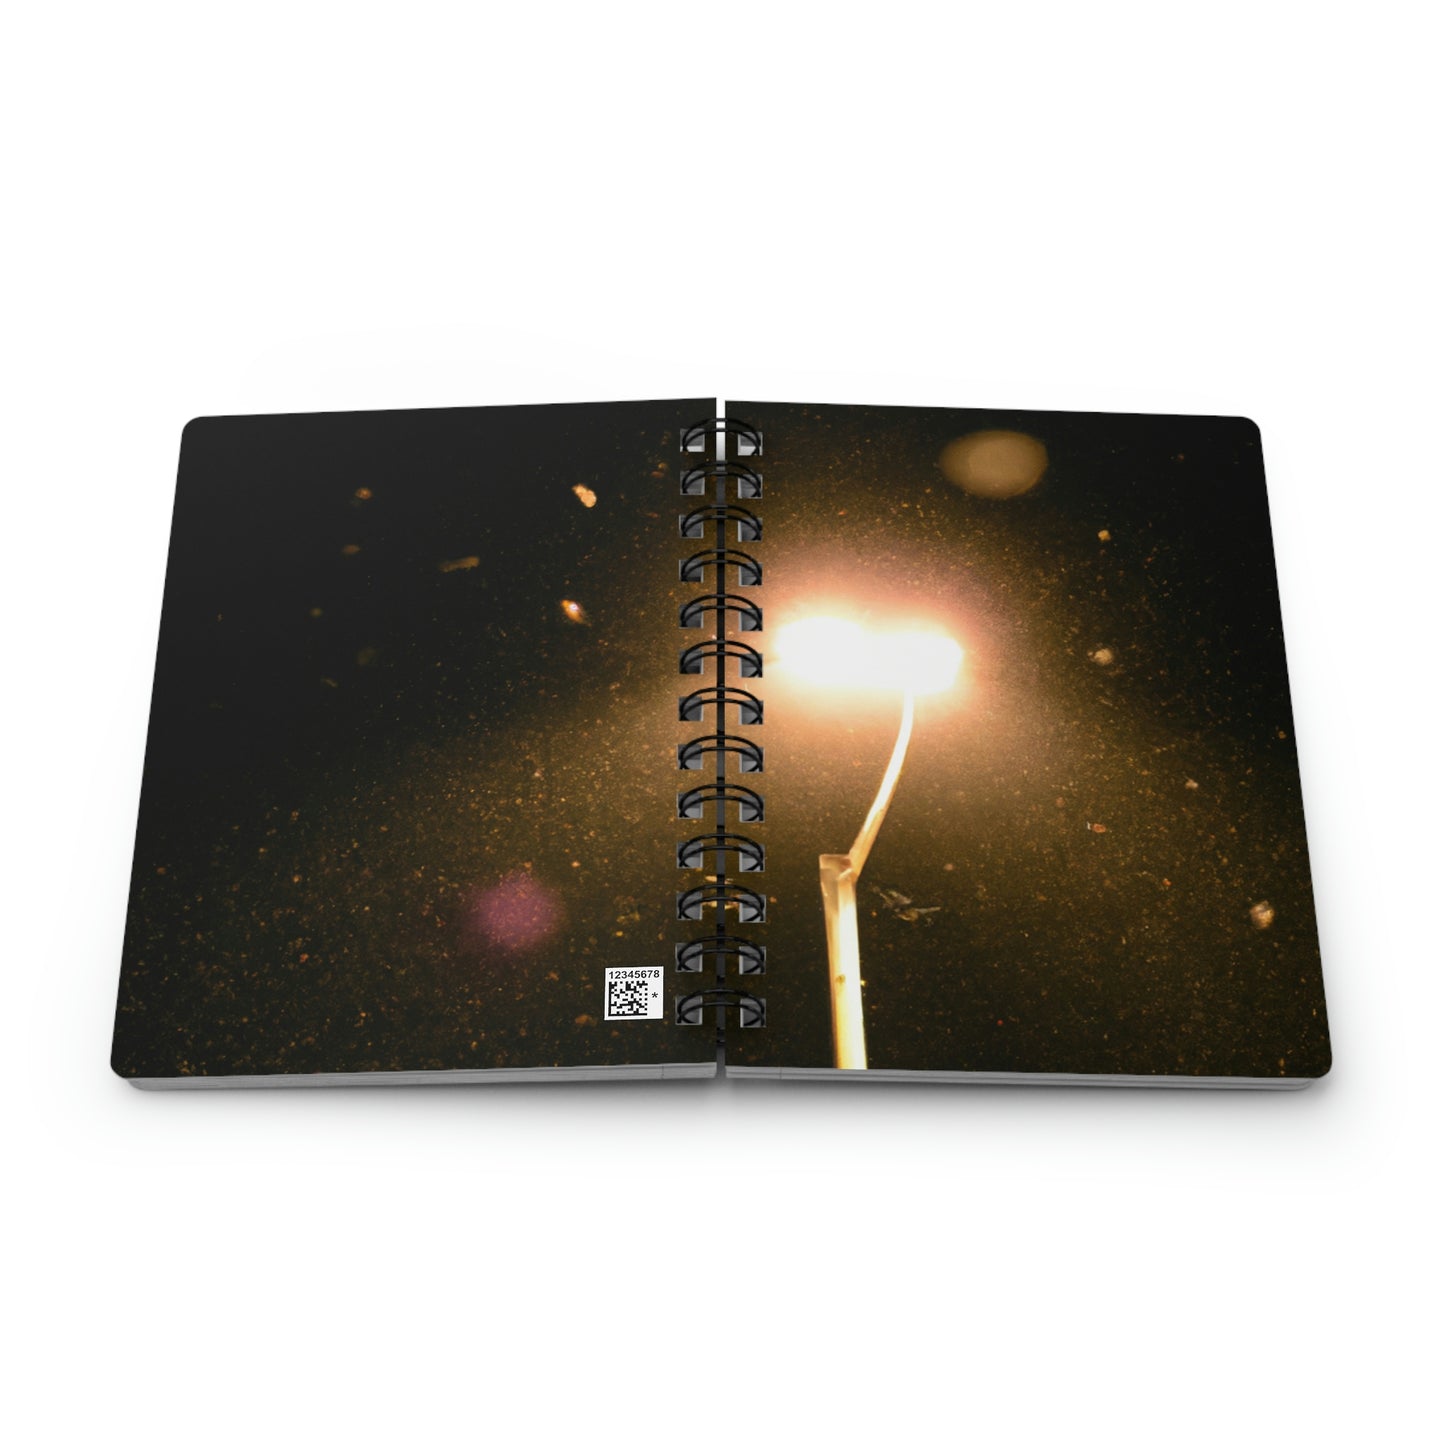 Winter's Lonely Lullaby - The Alien Spiral Bound Journal